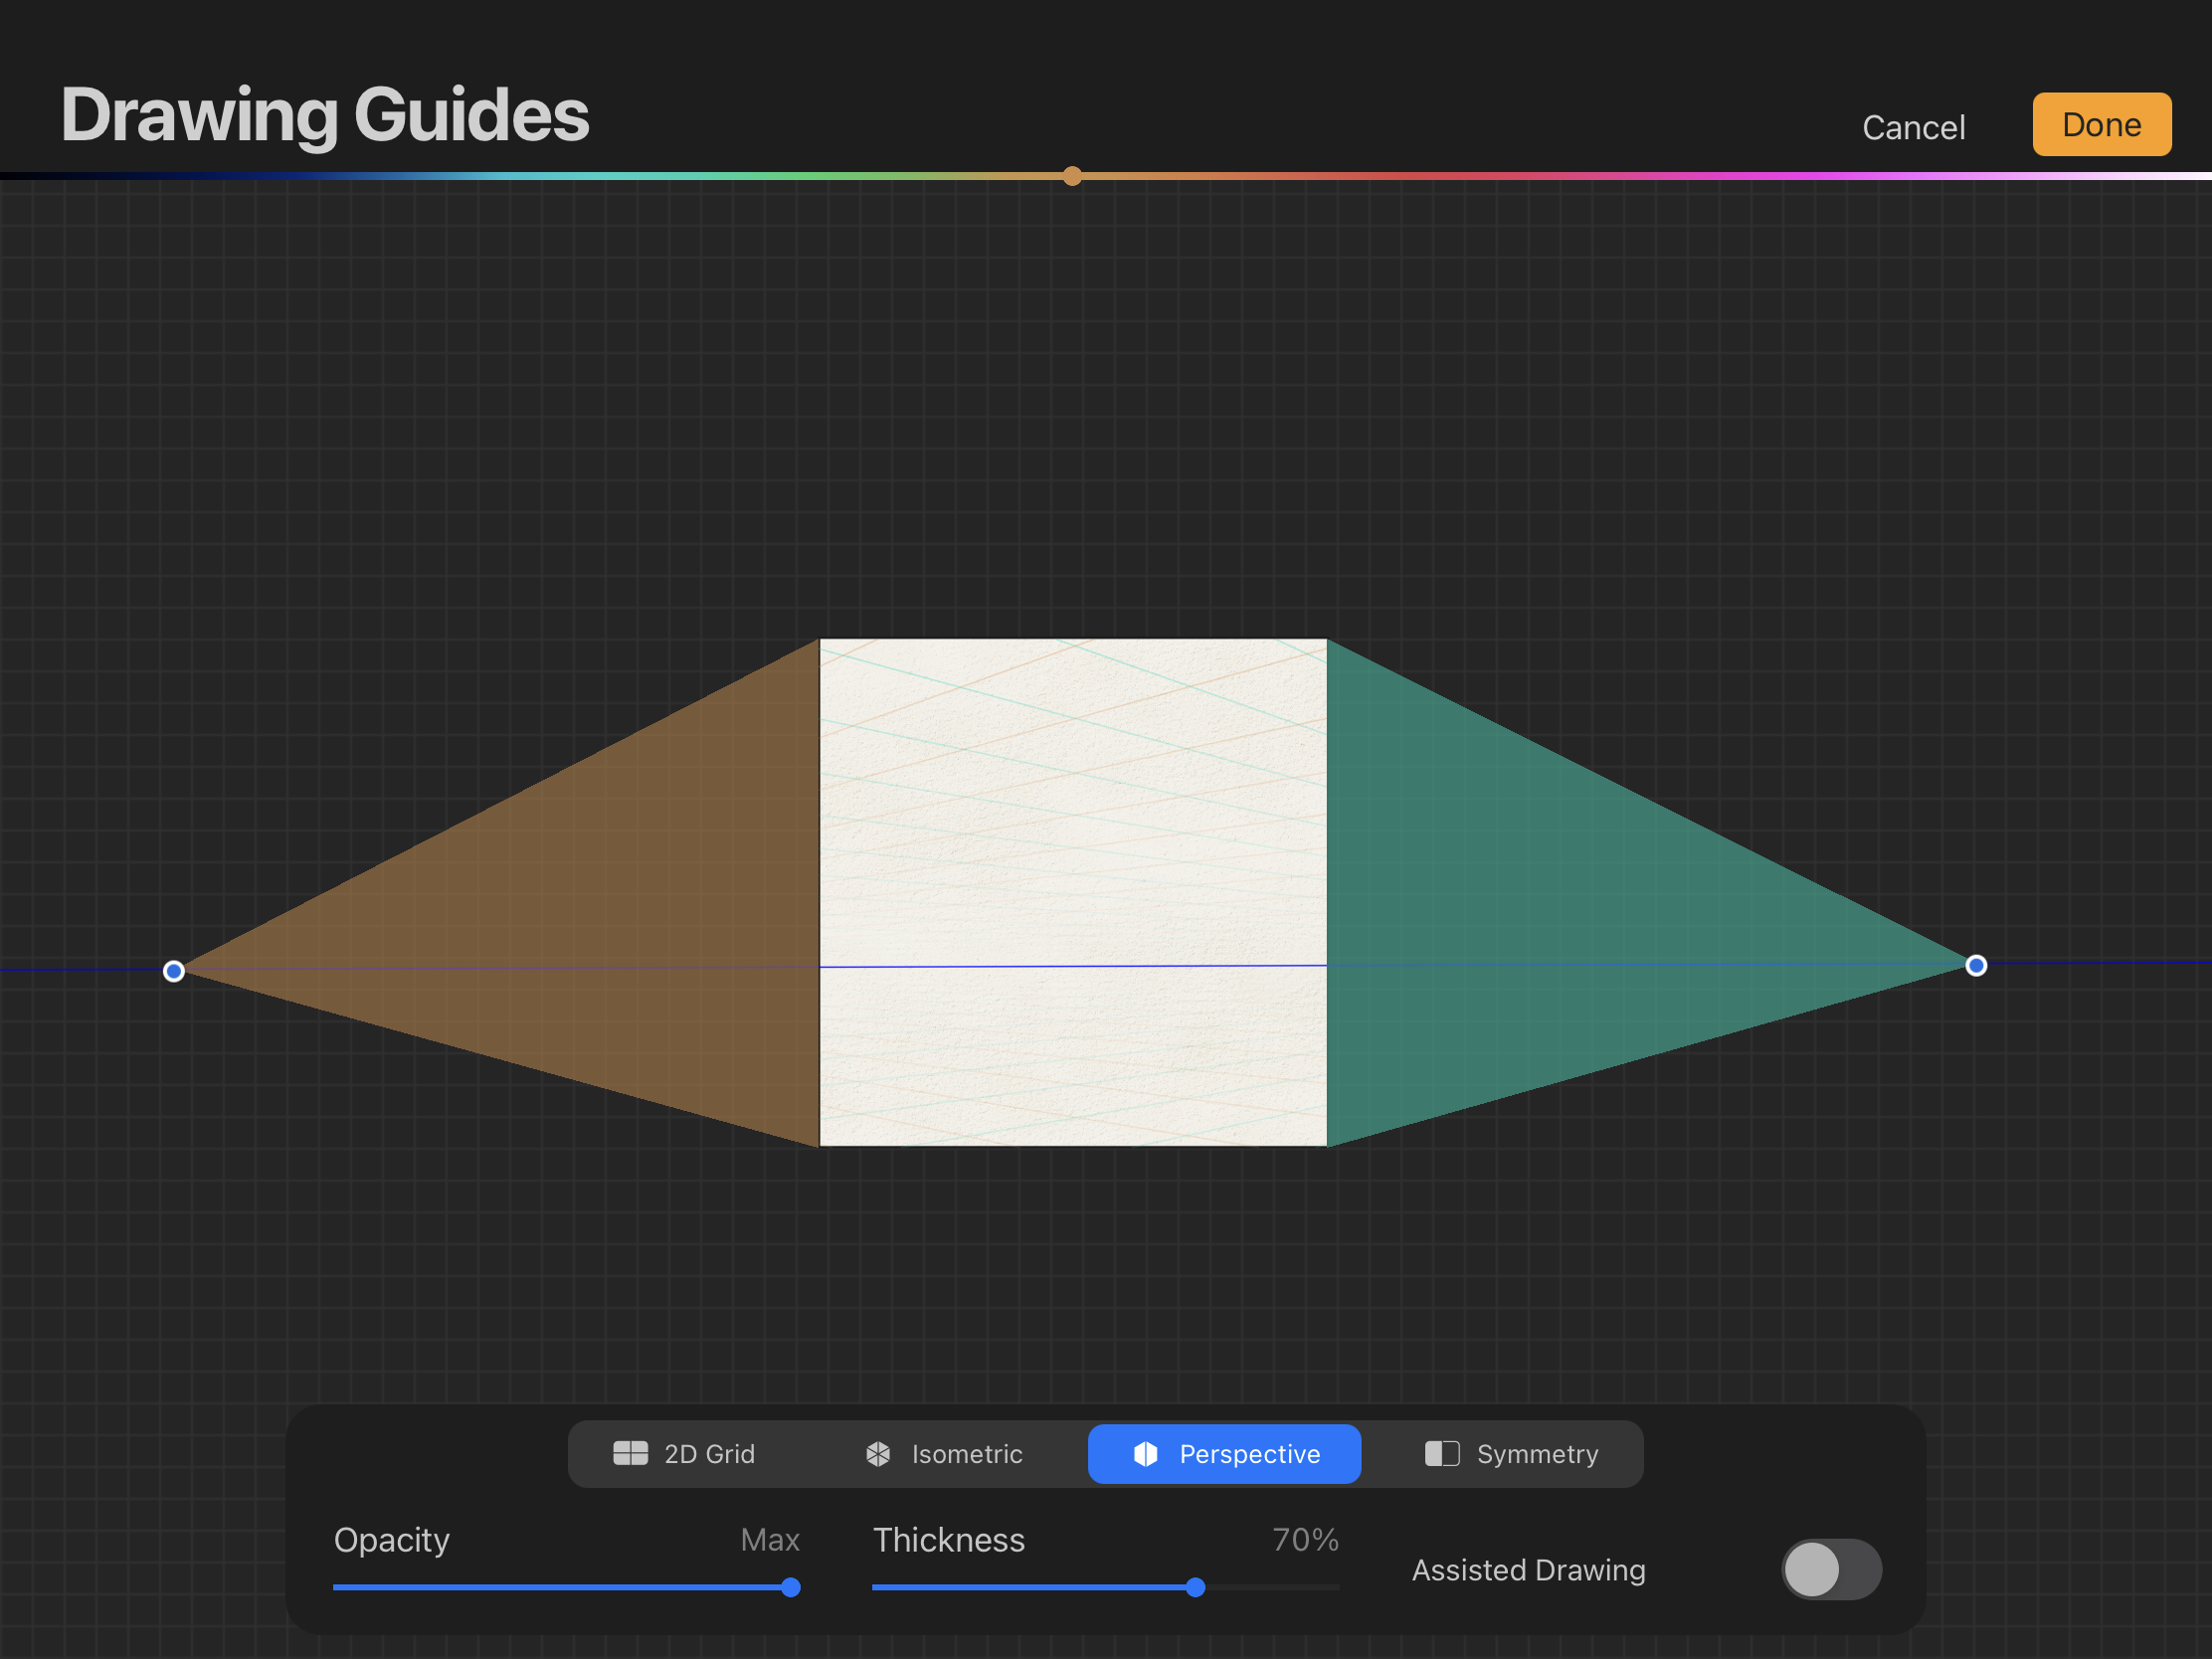 It shows how to set drawing guides for one, two, or three point perspective view.